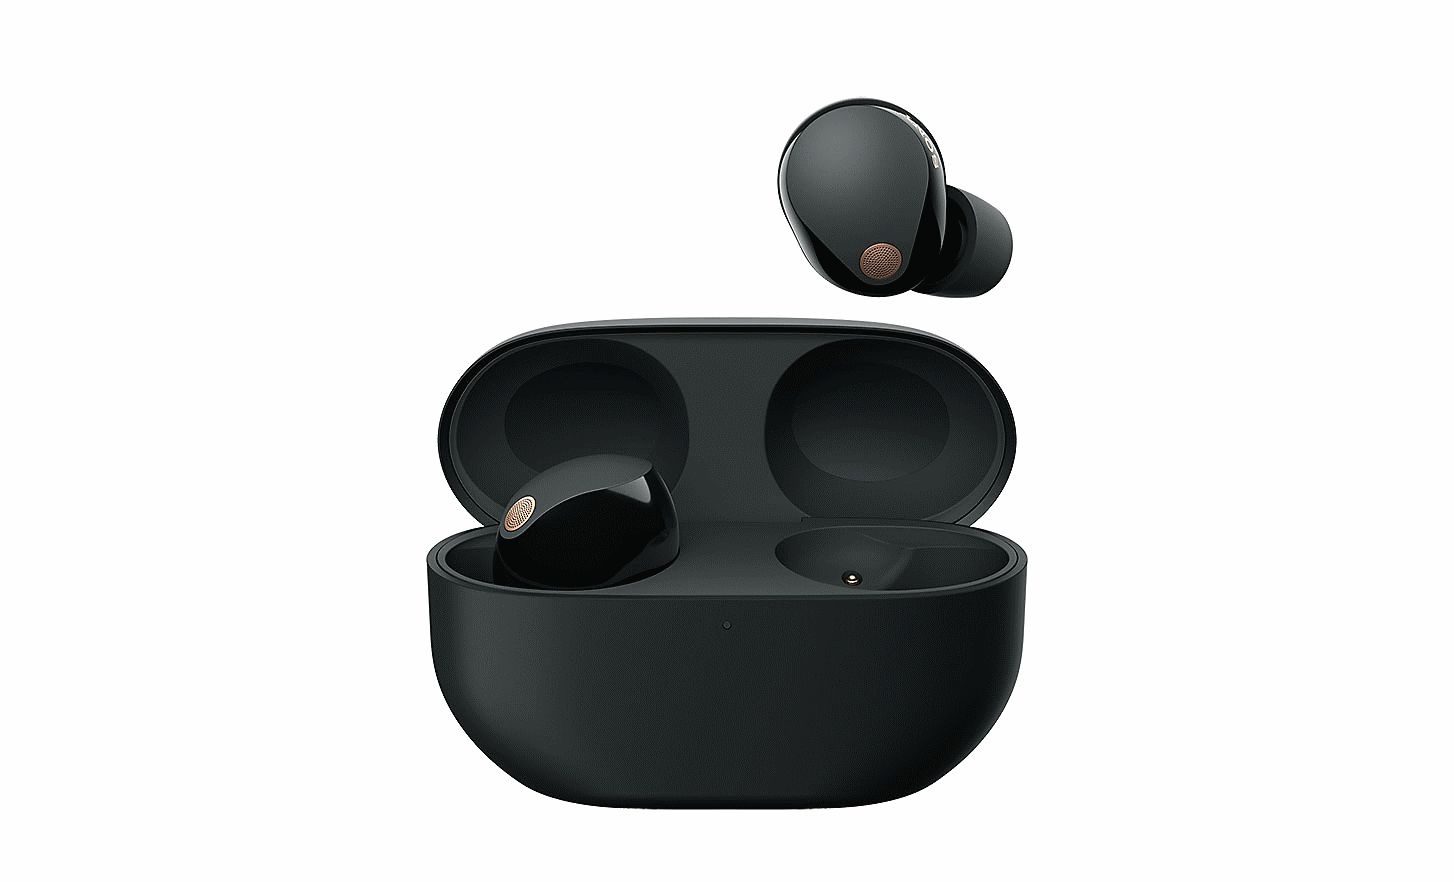 Image of the WF-1000XM5 headphones inside their case with the lid open with one headphone floating above the case